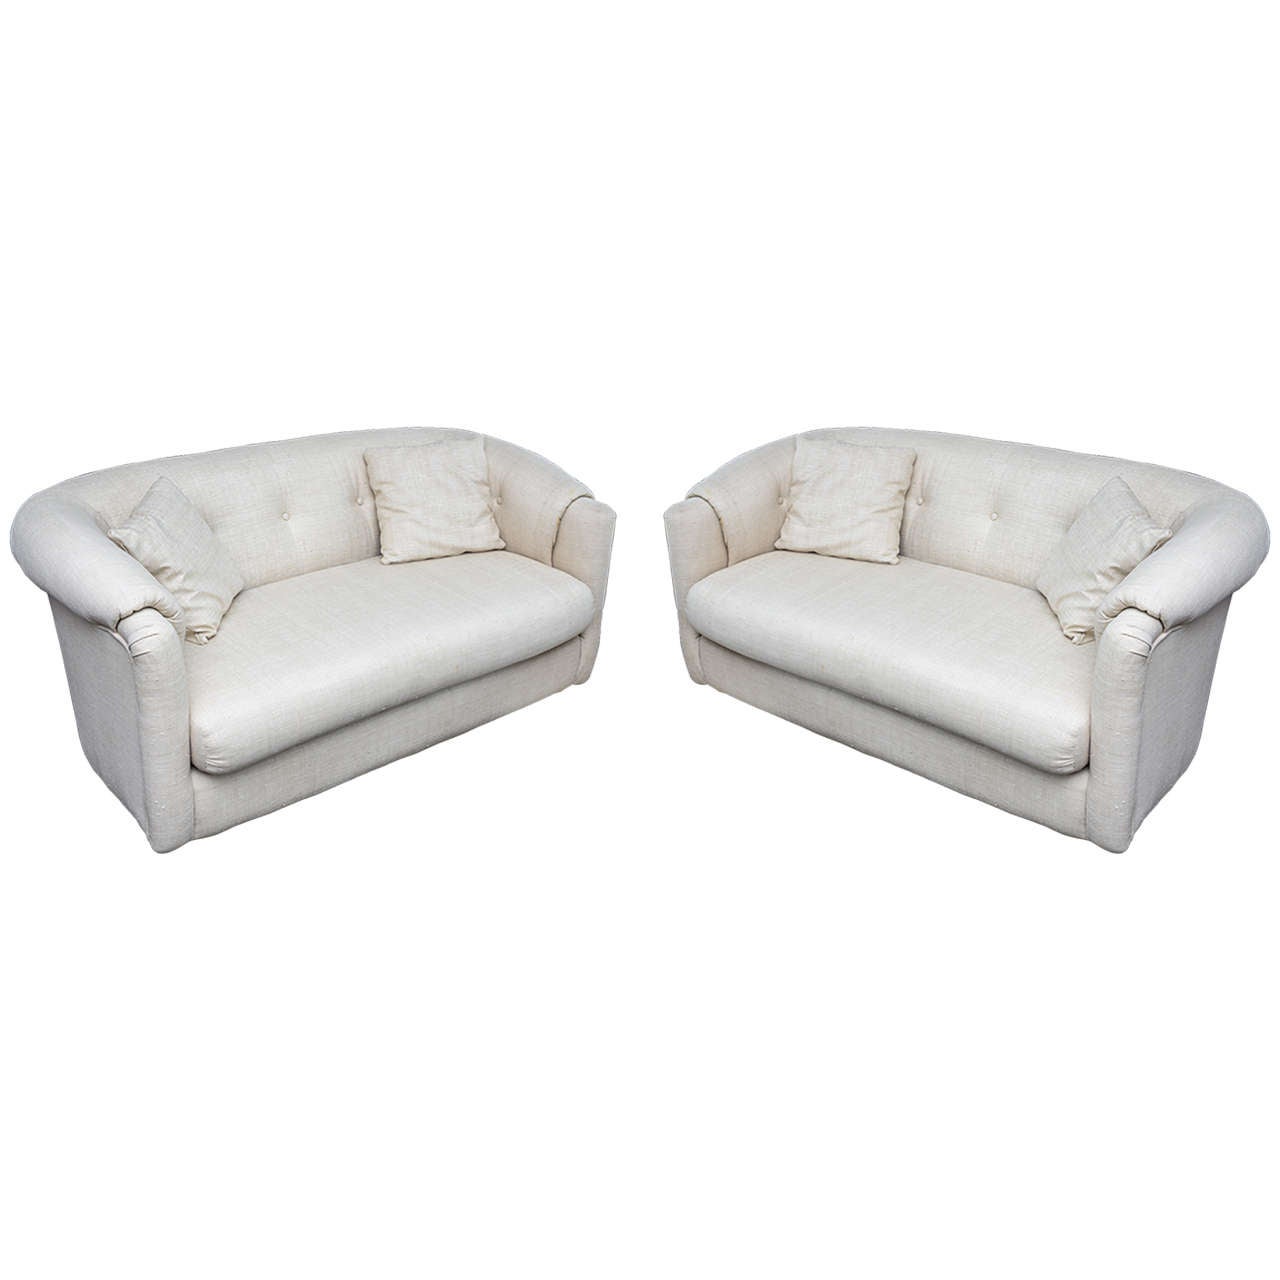 Pair of Raw Silk with Chrome Base Loveseats, USA, 1970s